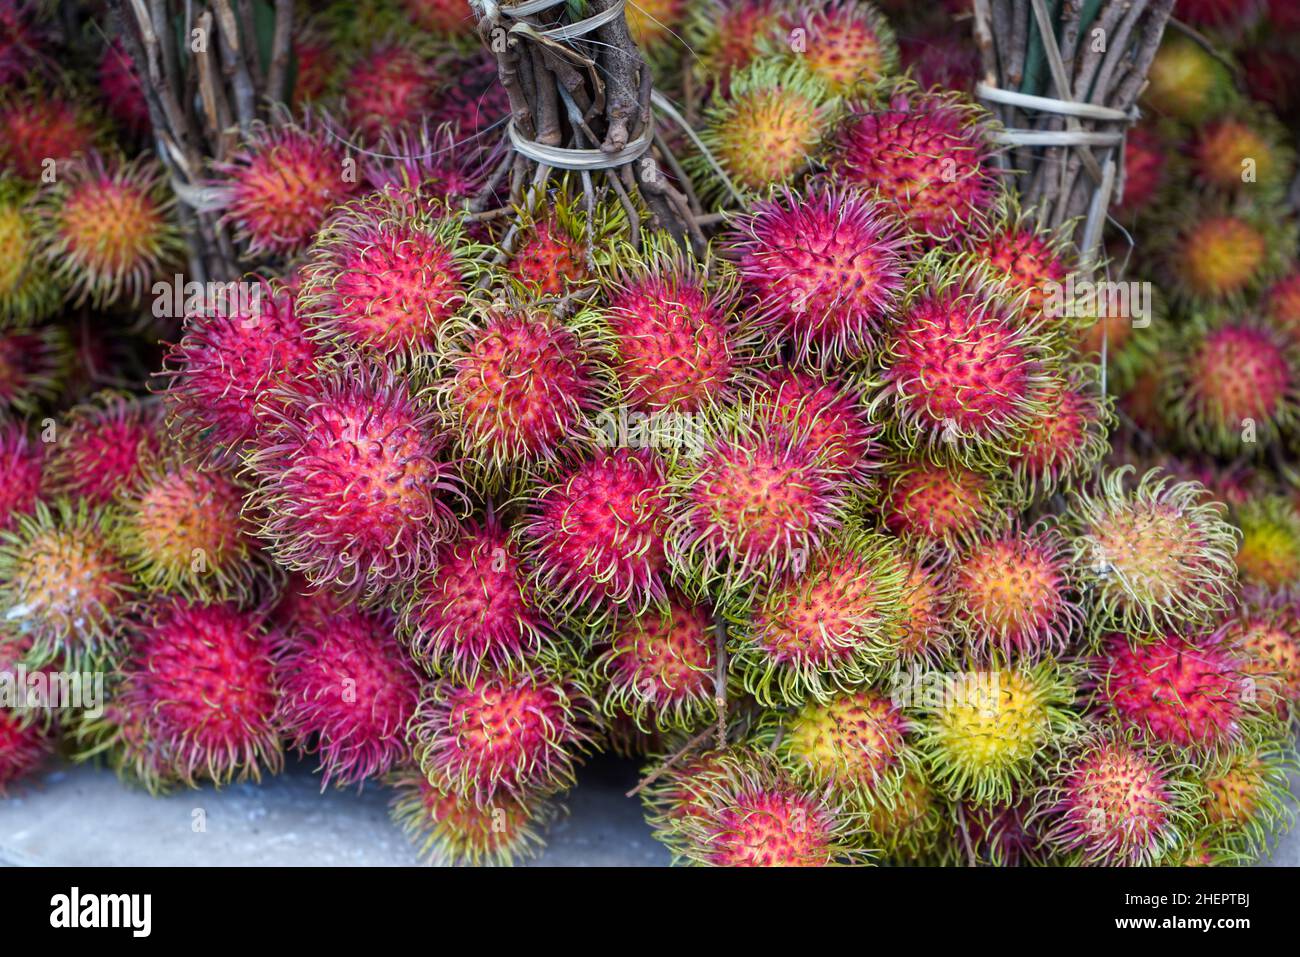 Rambutan (Nephelium lappaceum) is a medium-sized tropical tree in the family Sapindaceae. The name also refers to the edible fruit produced. Stock Photo